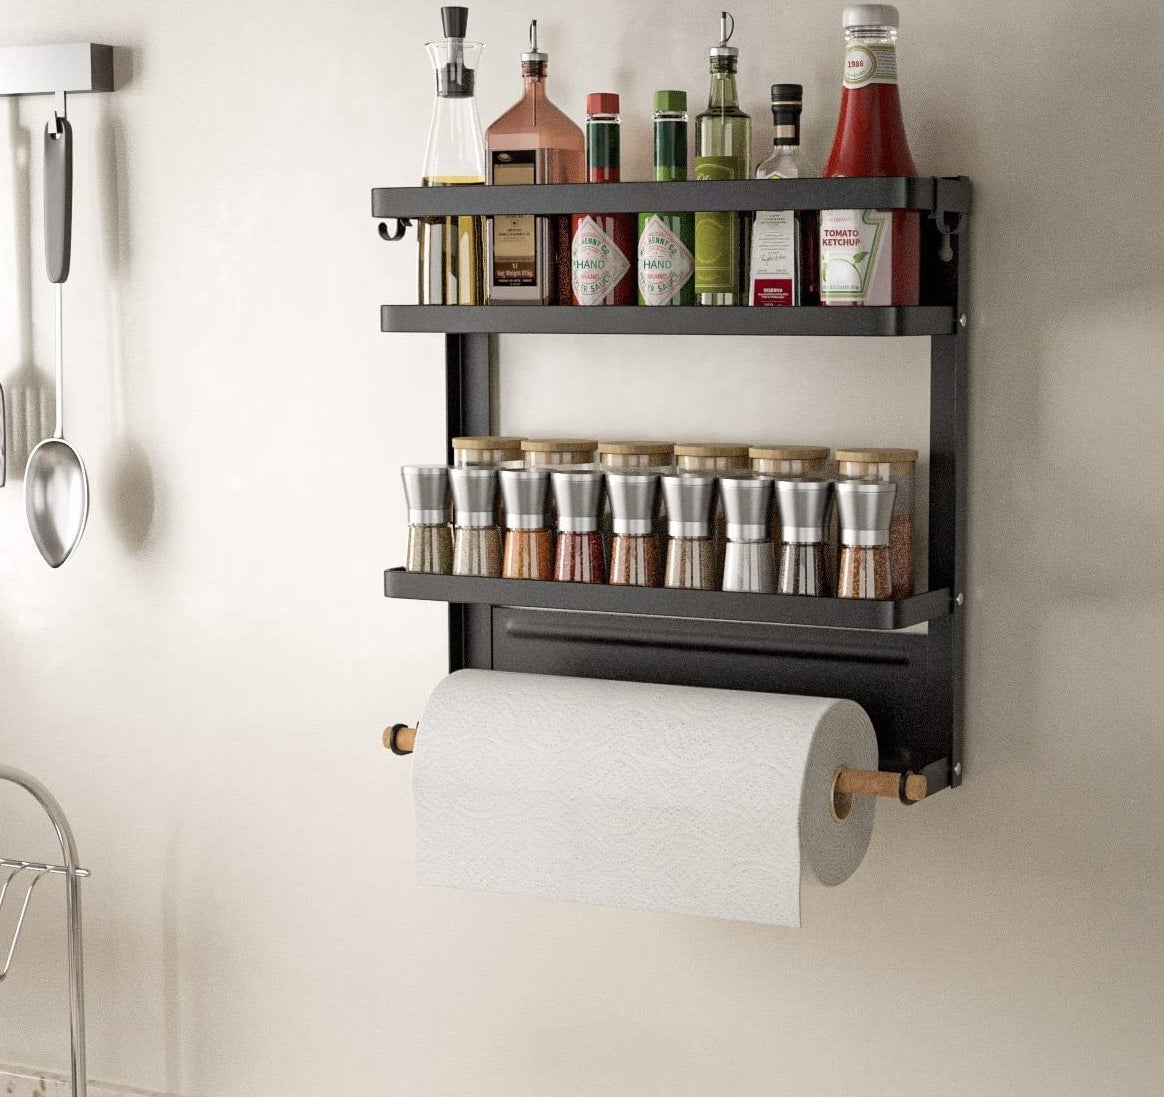 a spice rack shelf with a paper towel roll holder mounted to a roll